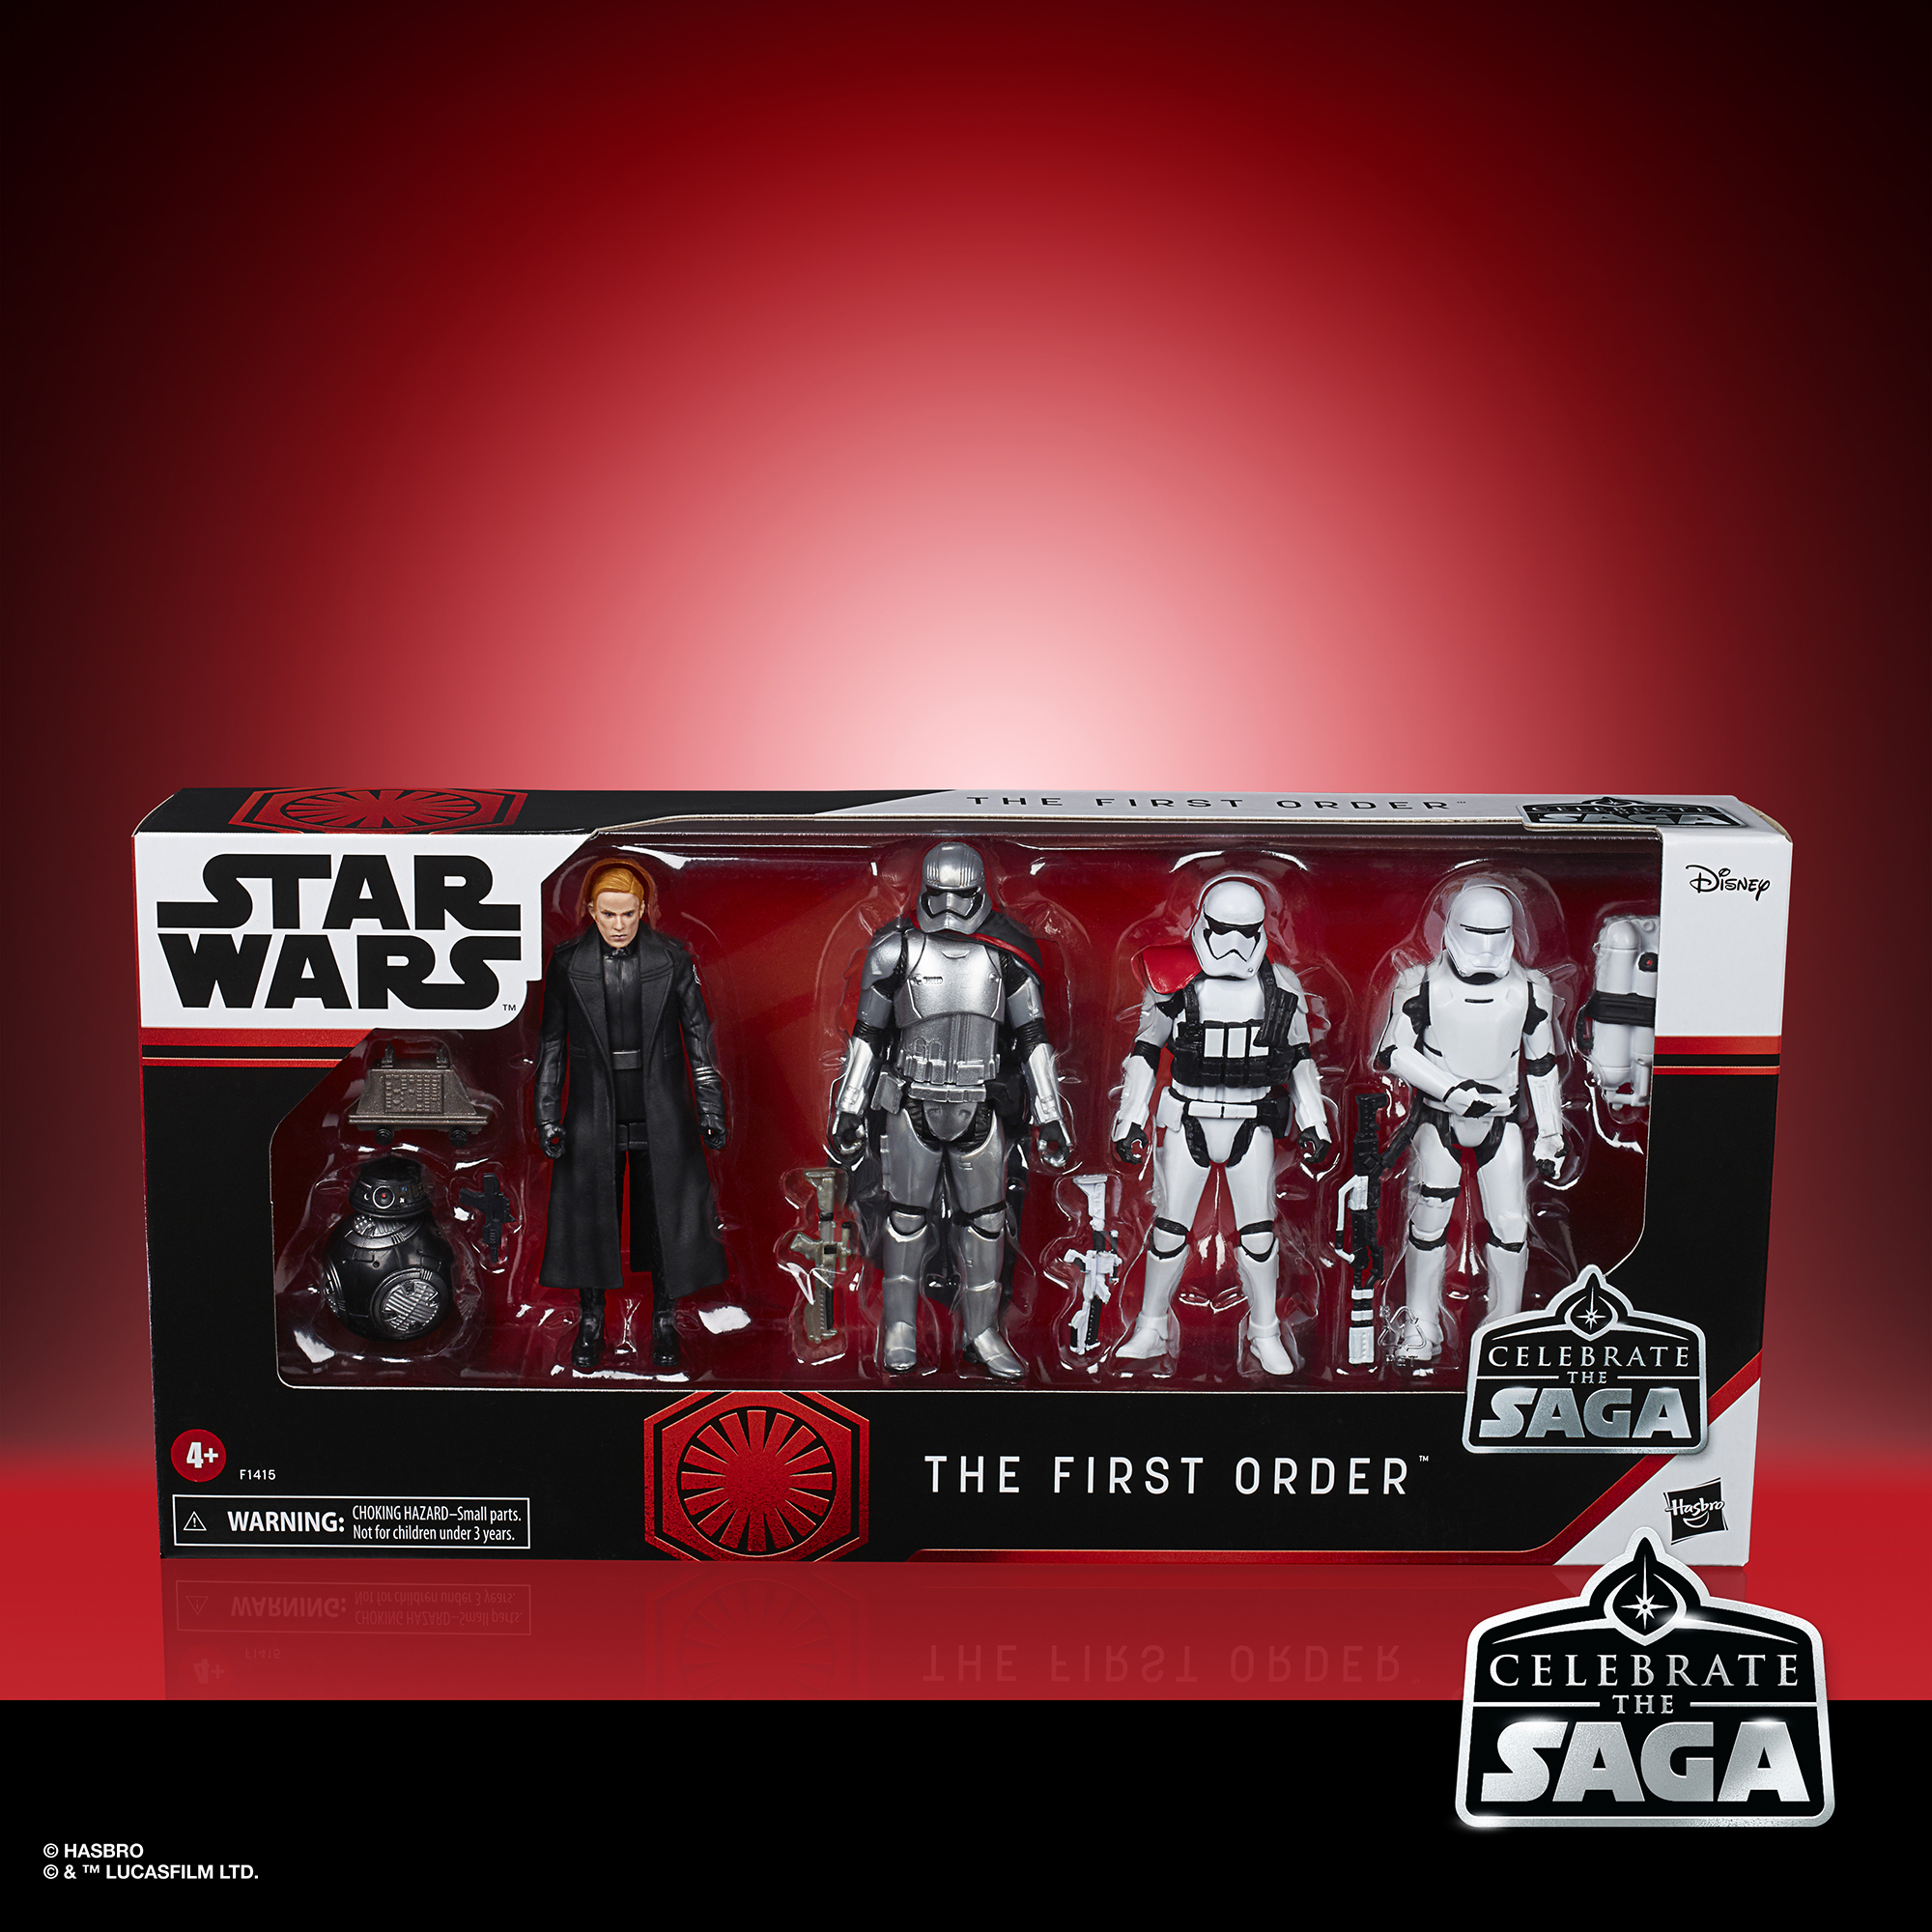 Details about   Star Wars Black Series Action Figures Hasbro Clone Trooper Sith Jedi Figures